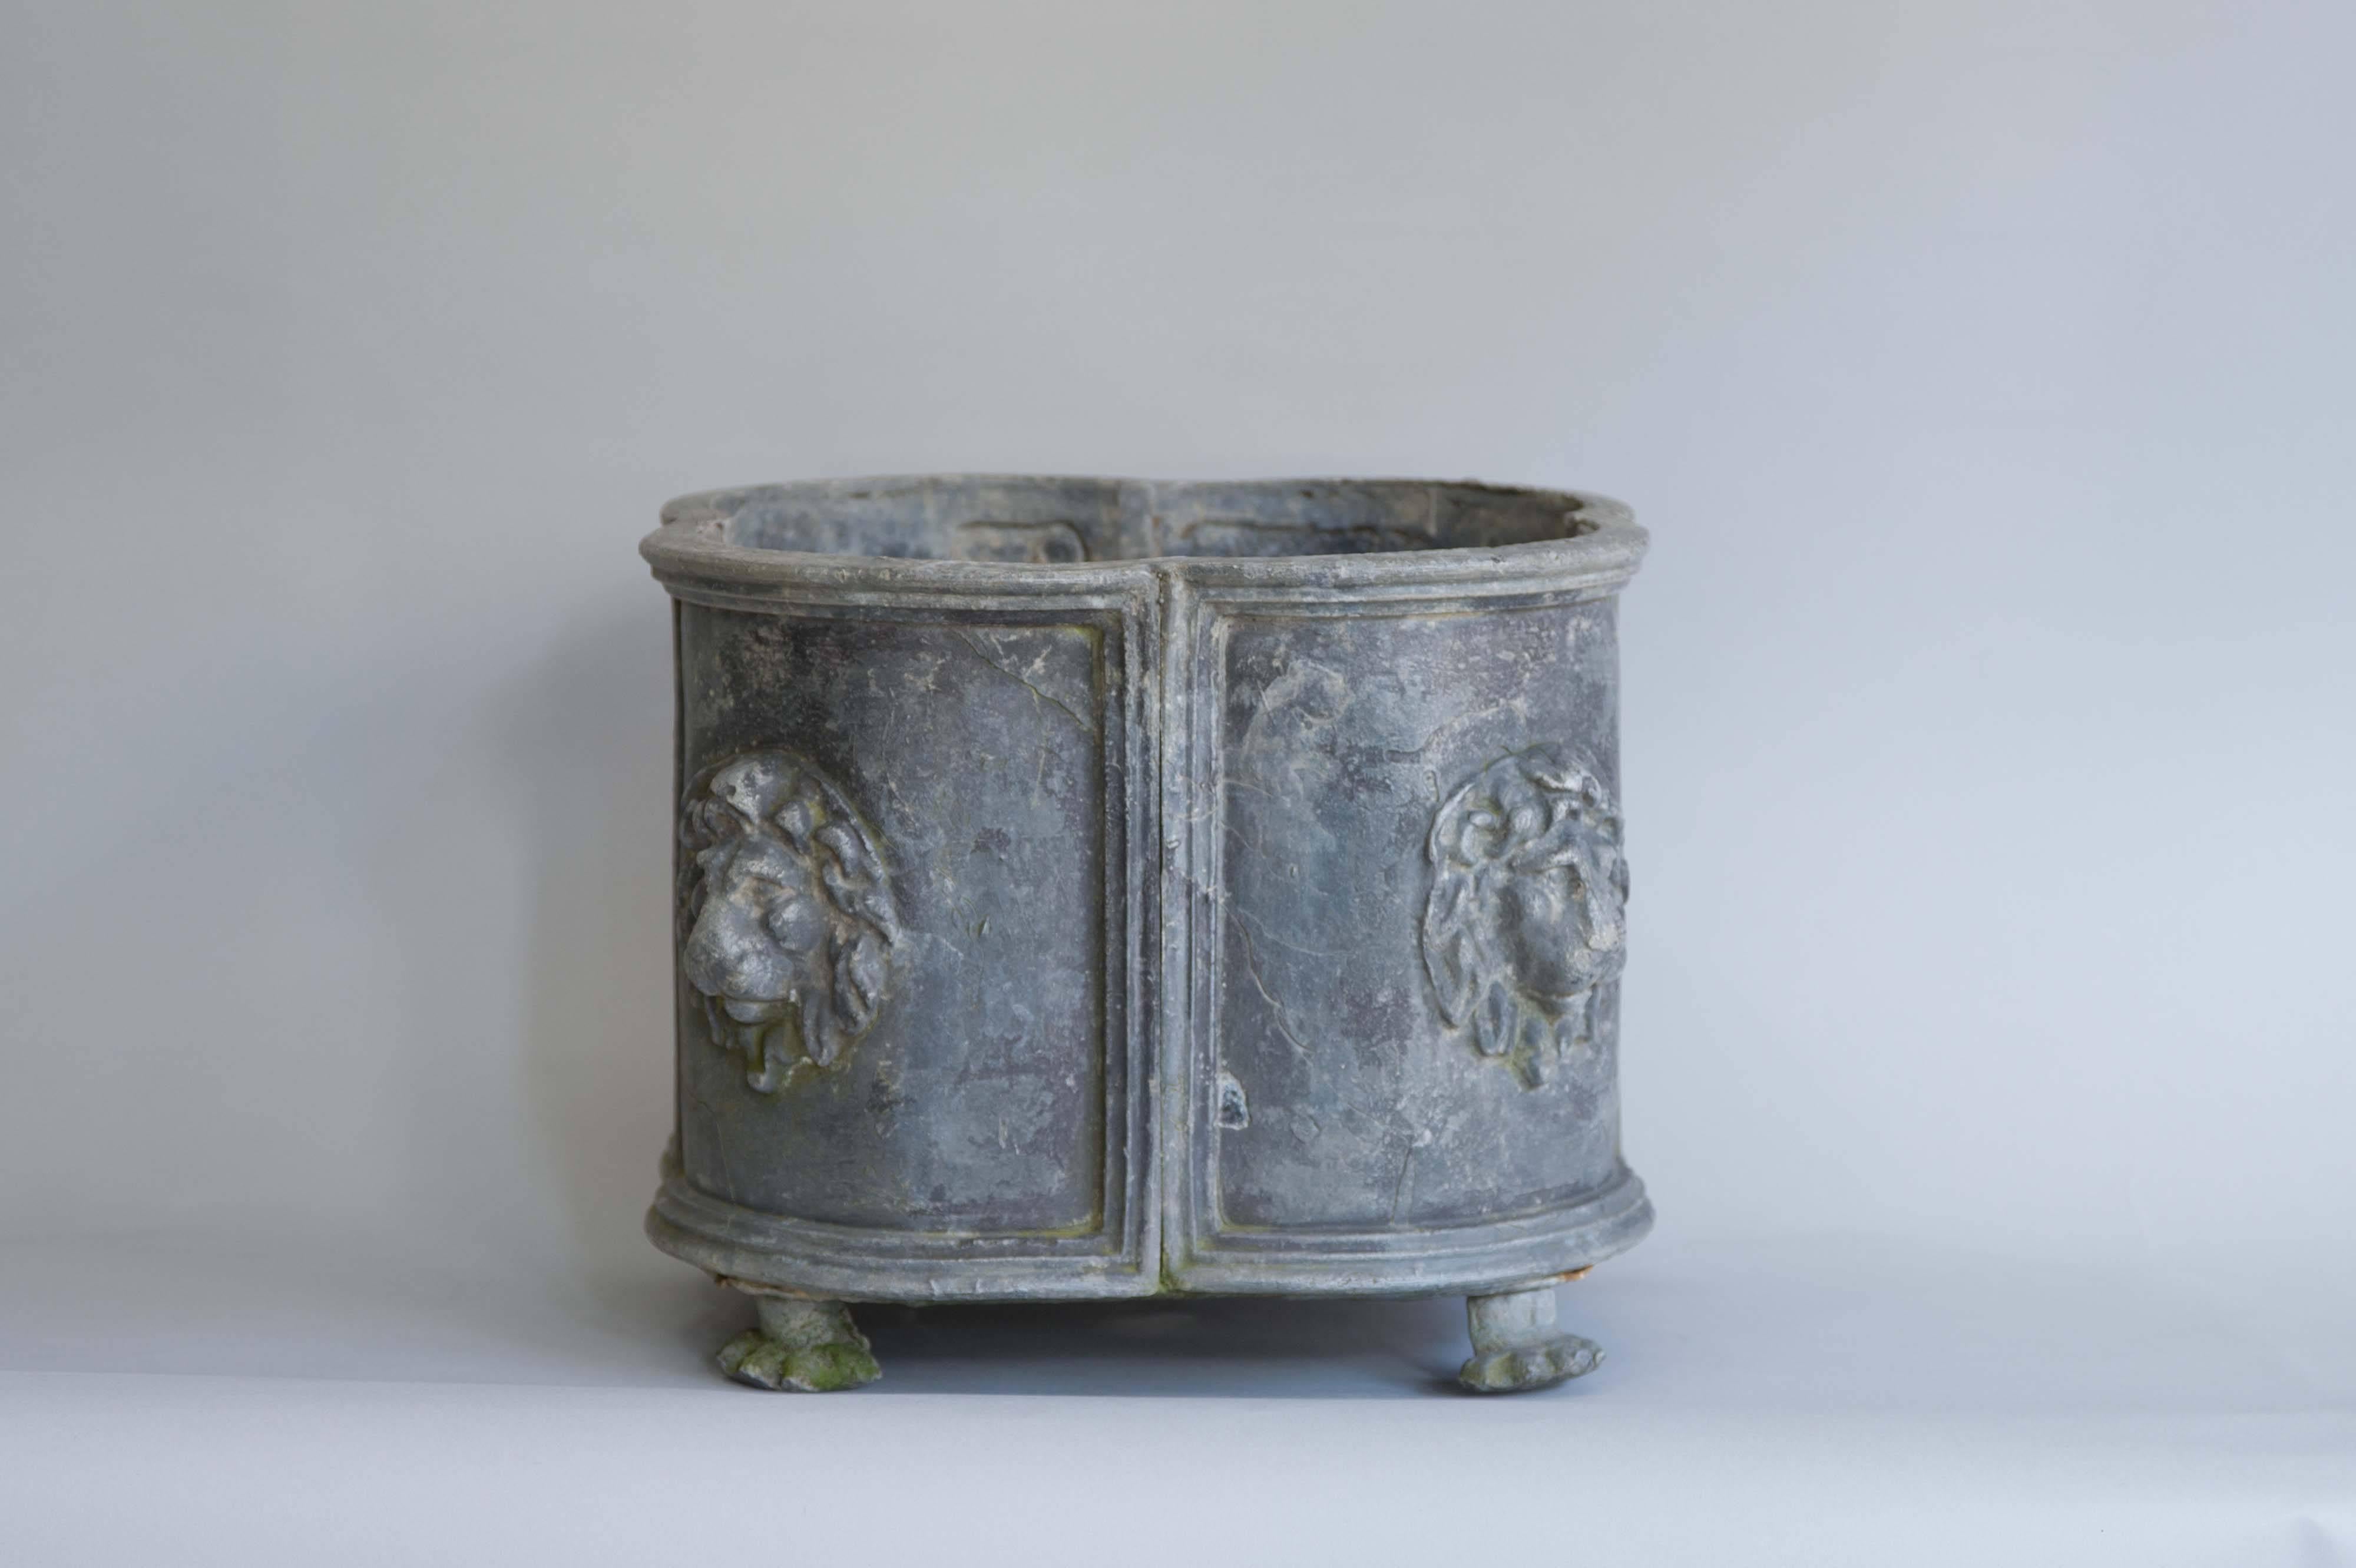 A late 18th century English lead planter. Solid lead in quatrefoil shape with panels showing lion heads and standing on four lion paws. Extremely solid and heavy item to withstand the whims of English weather. The planter has a lovely powder grey